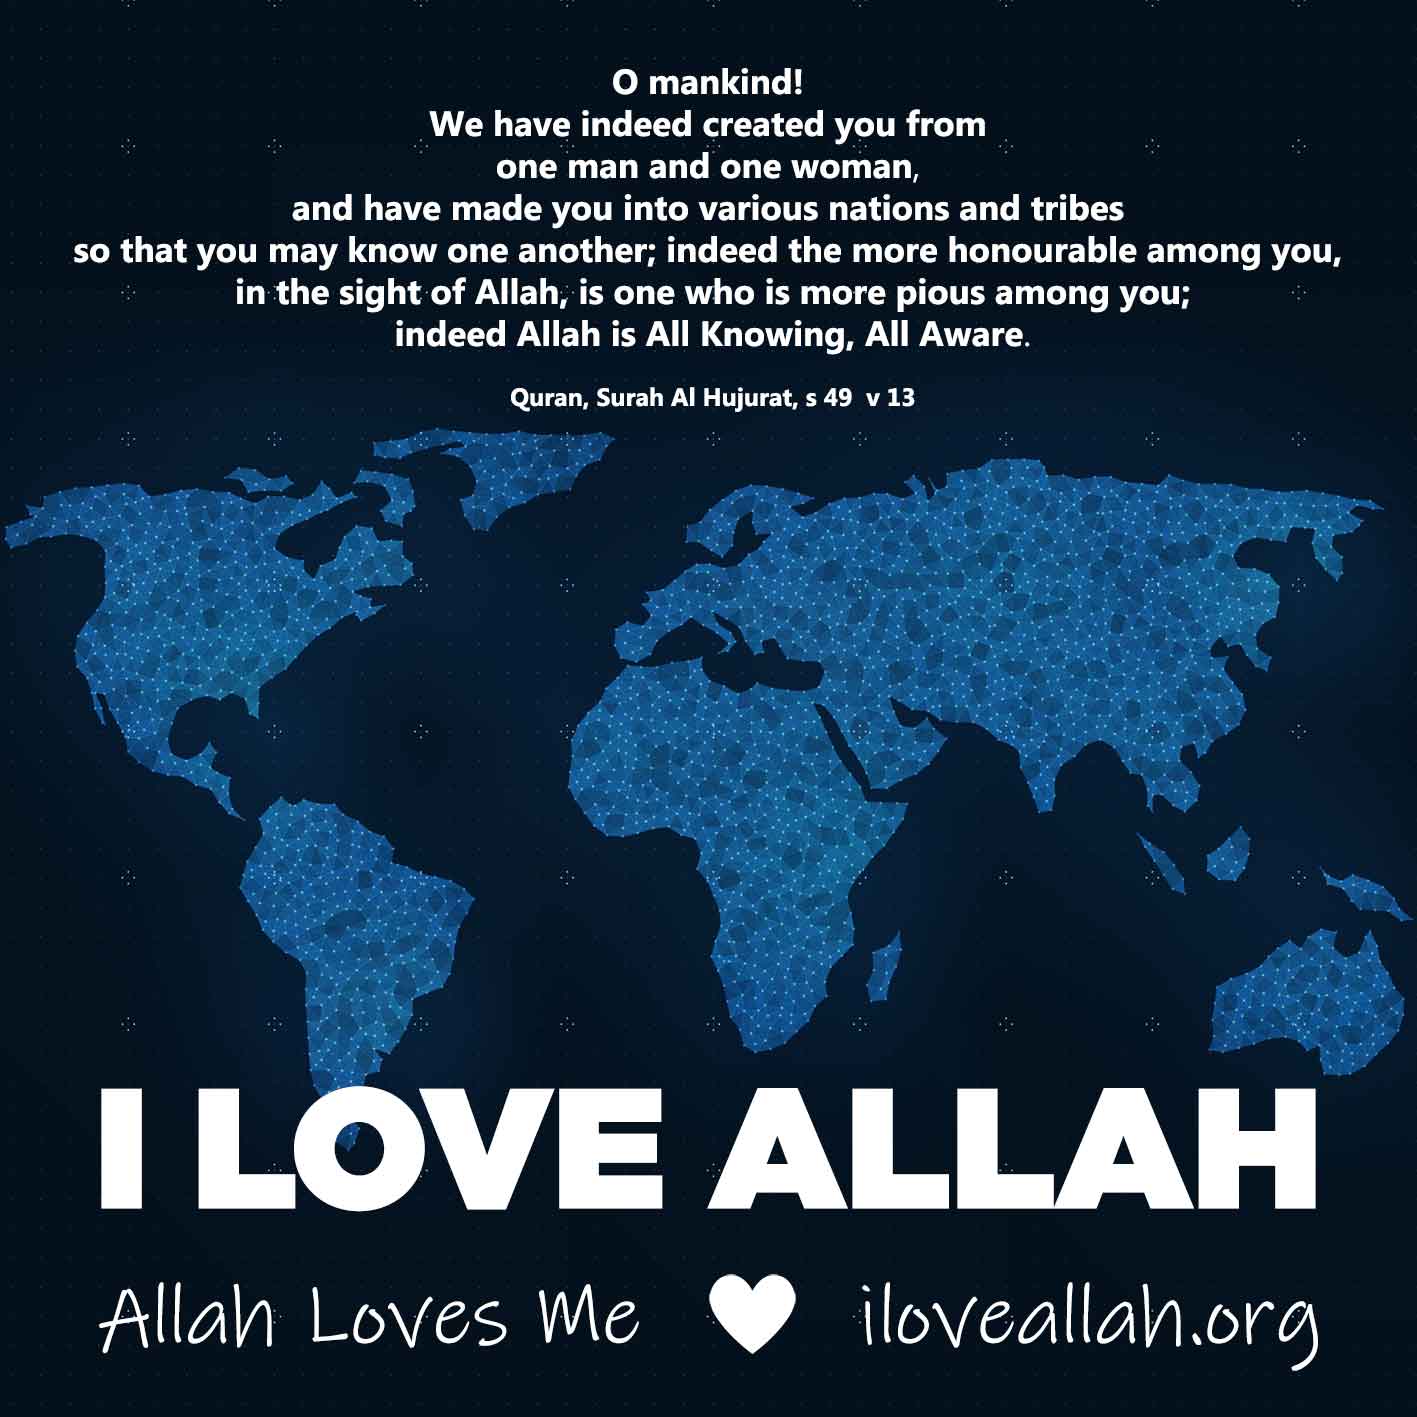 Quran-Surah Al Hujurat s49 v13 - One Man and One Woman - Nations & Tribes - I Love Allah - Allah Loves Me - iloveallah.org